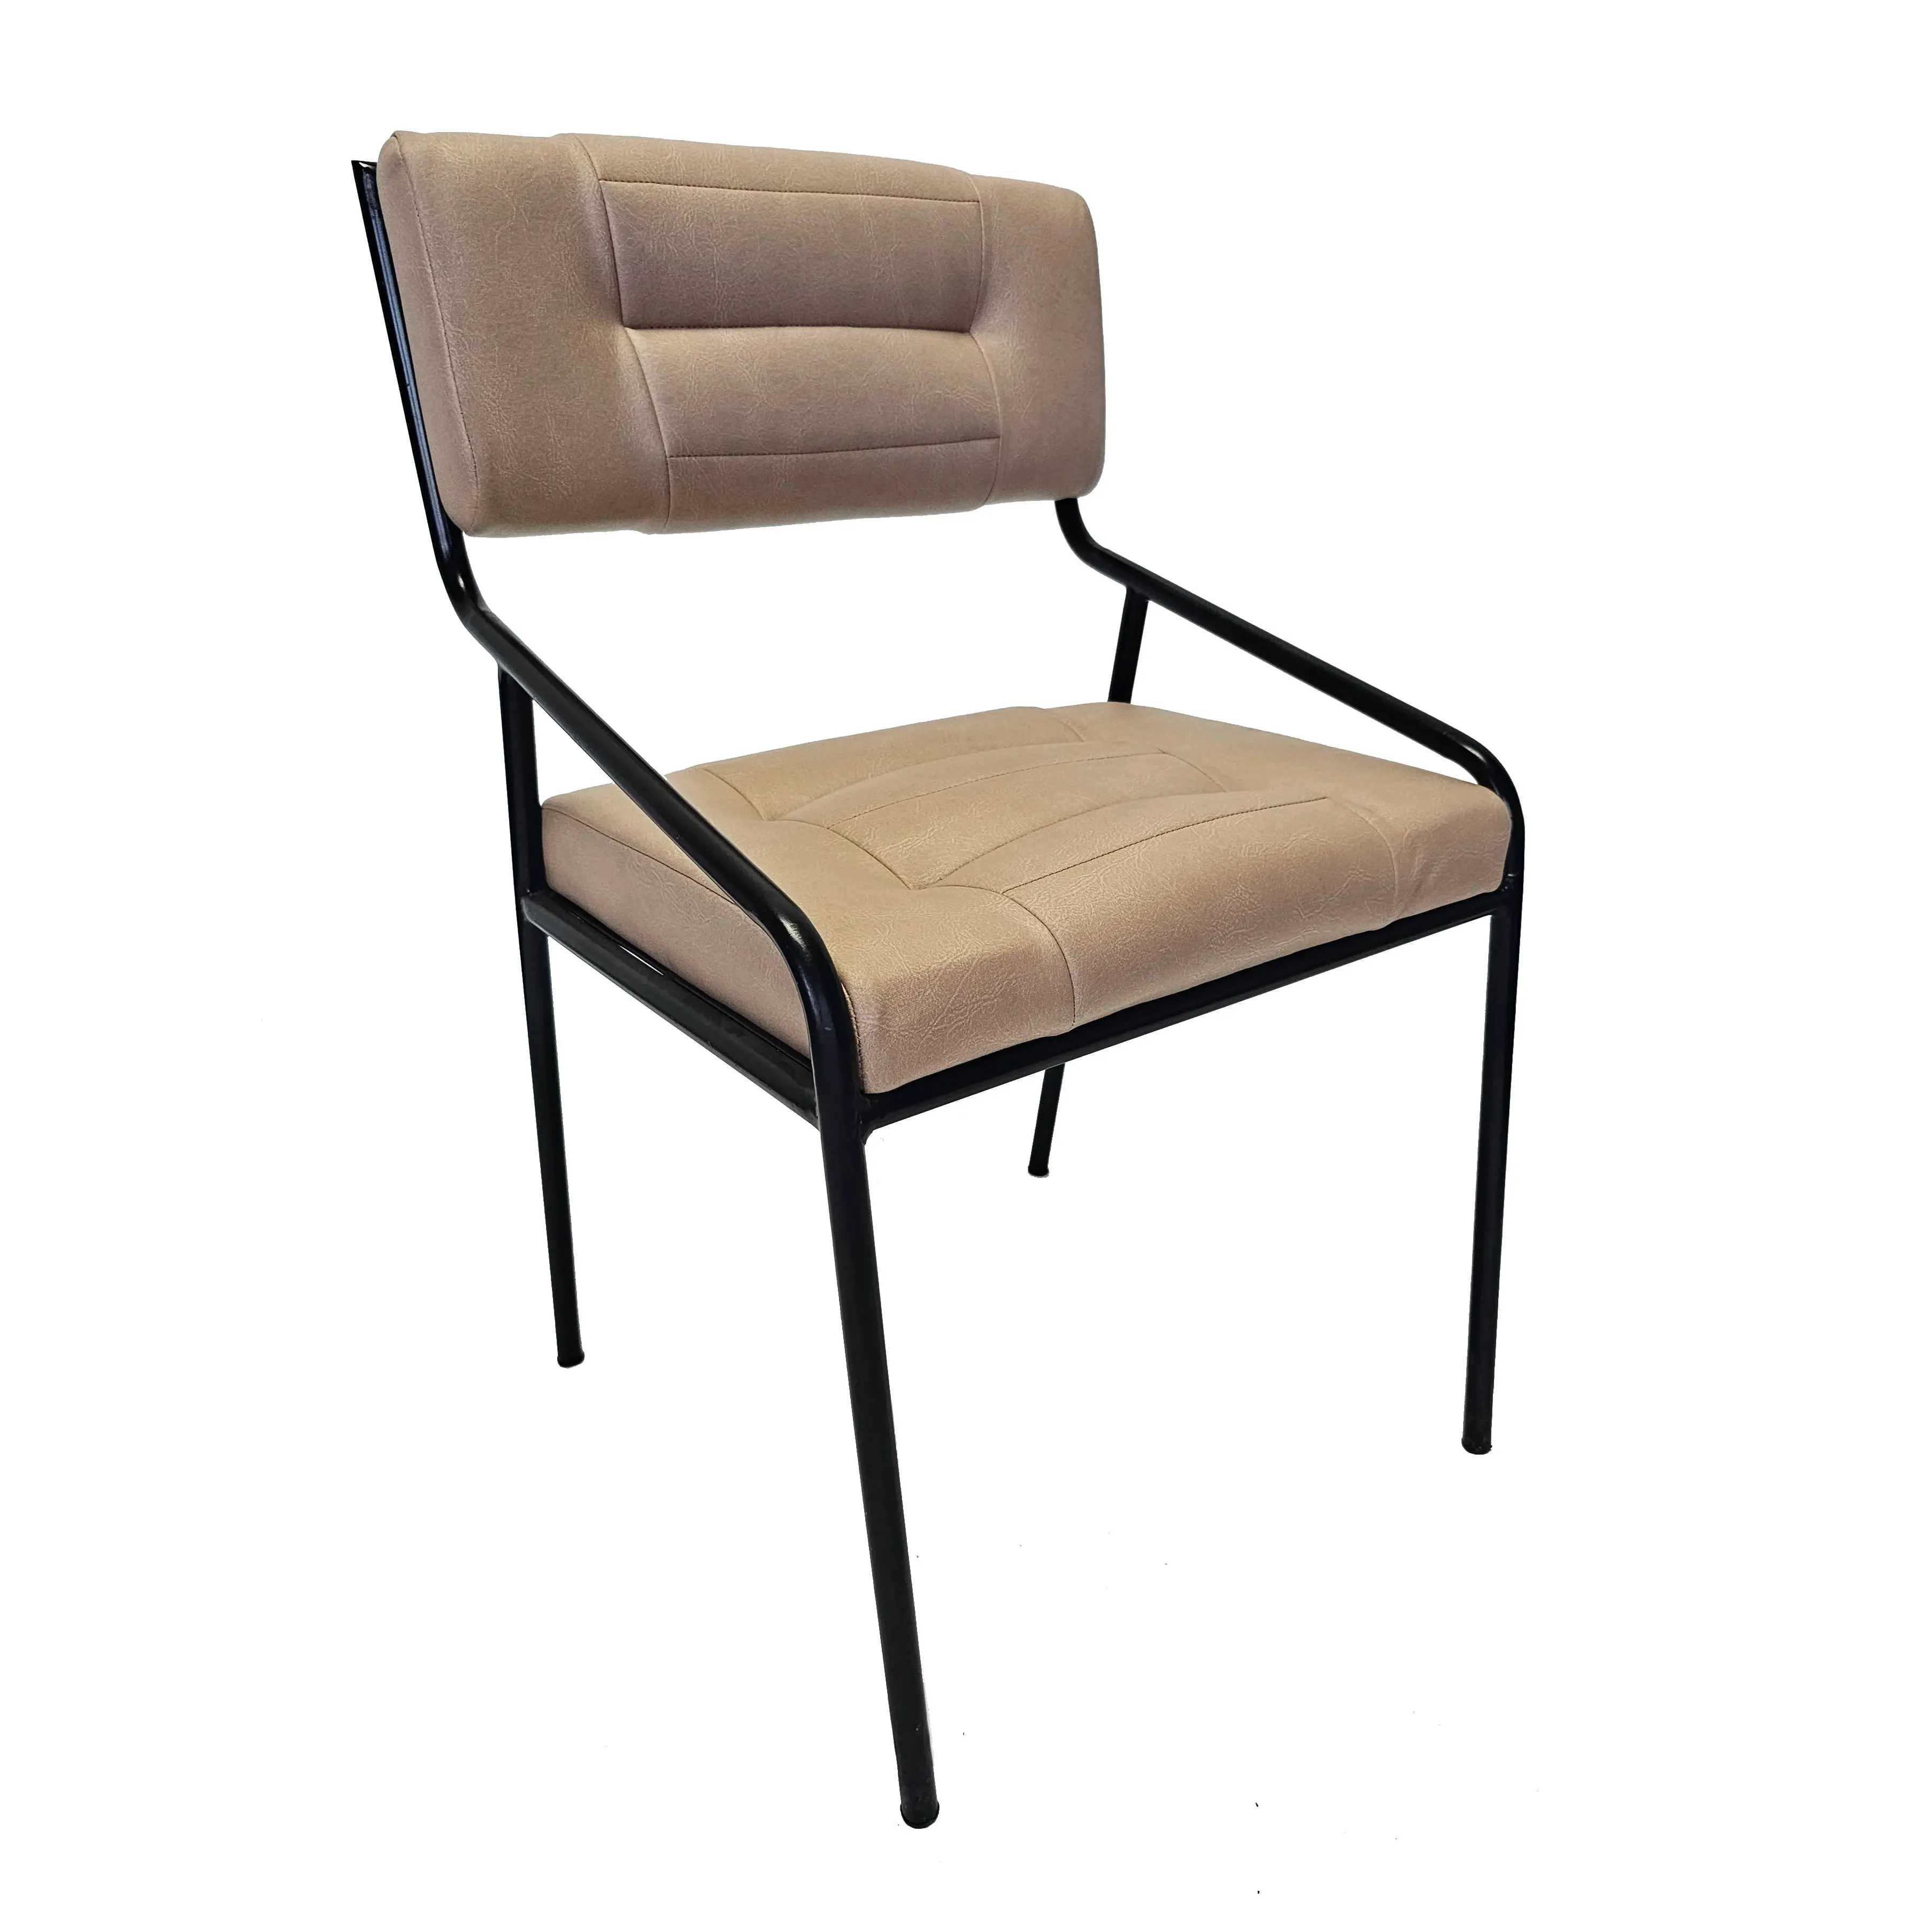 Iron leather Dining Chair with skin Color Leather